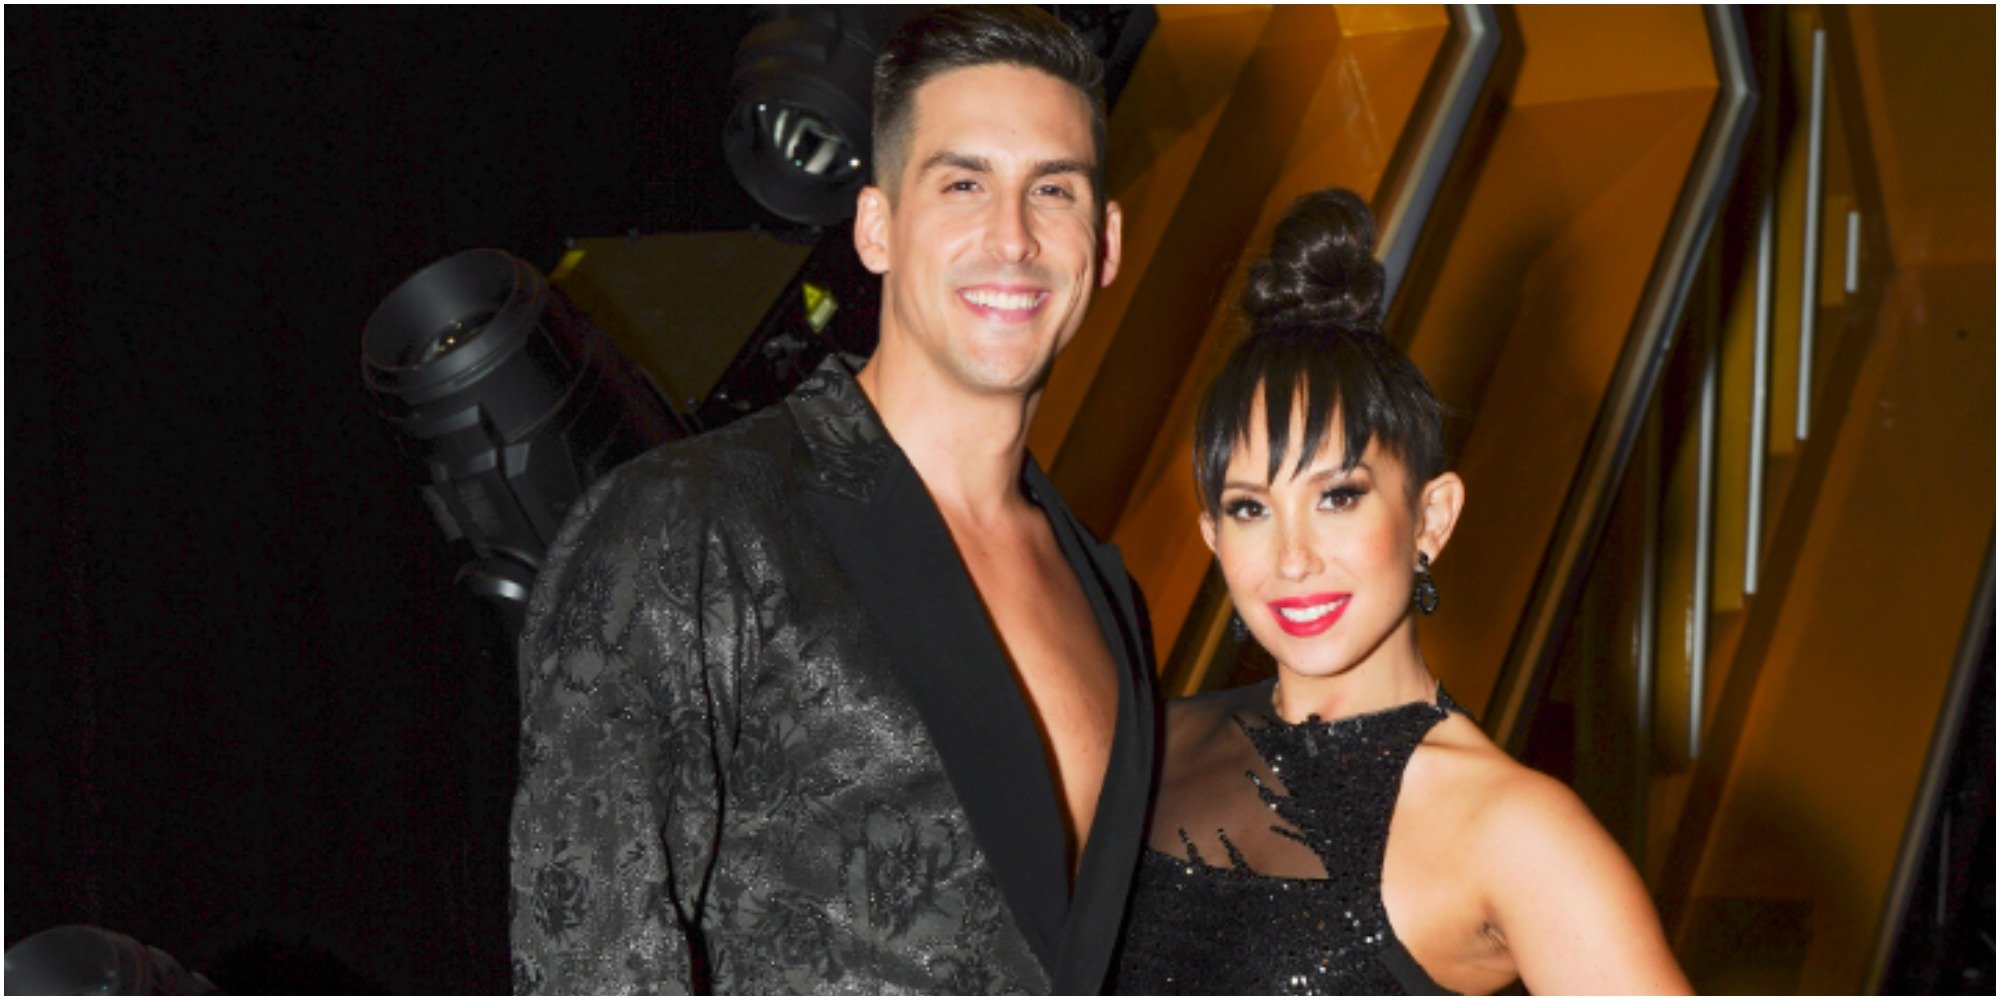 Cody Rigsby and Cheryl Burke pose ahead of a performance on "Dancing with the Stars."